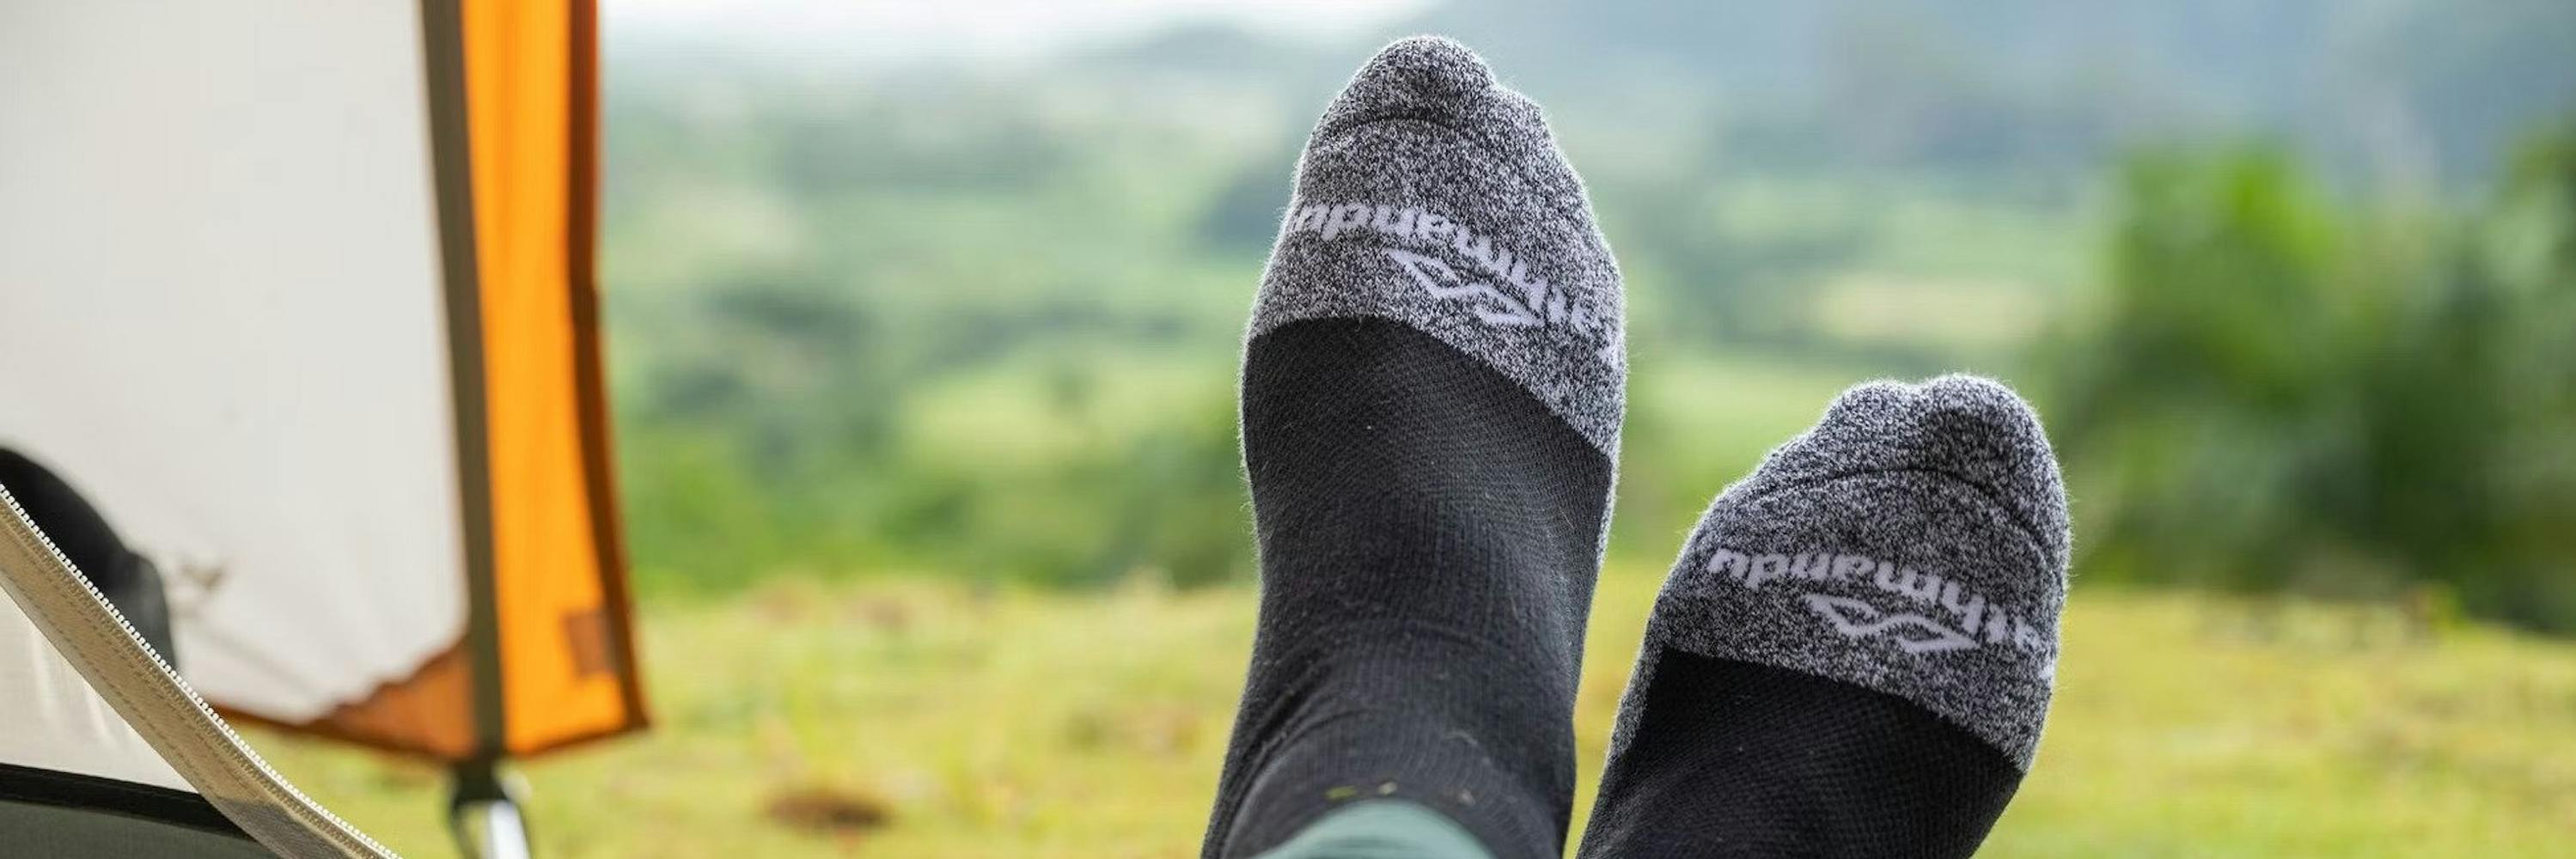 How to Choose the Perfect Hiking Socks